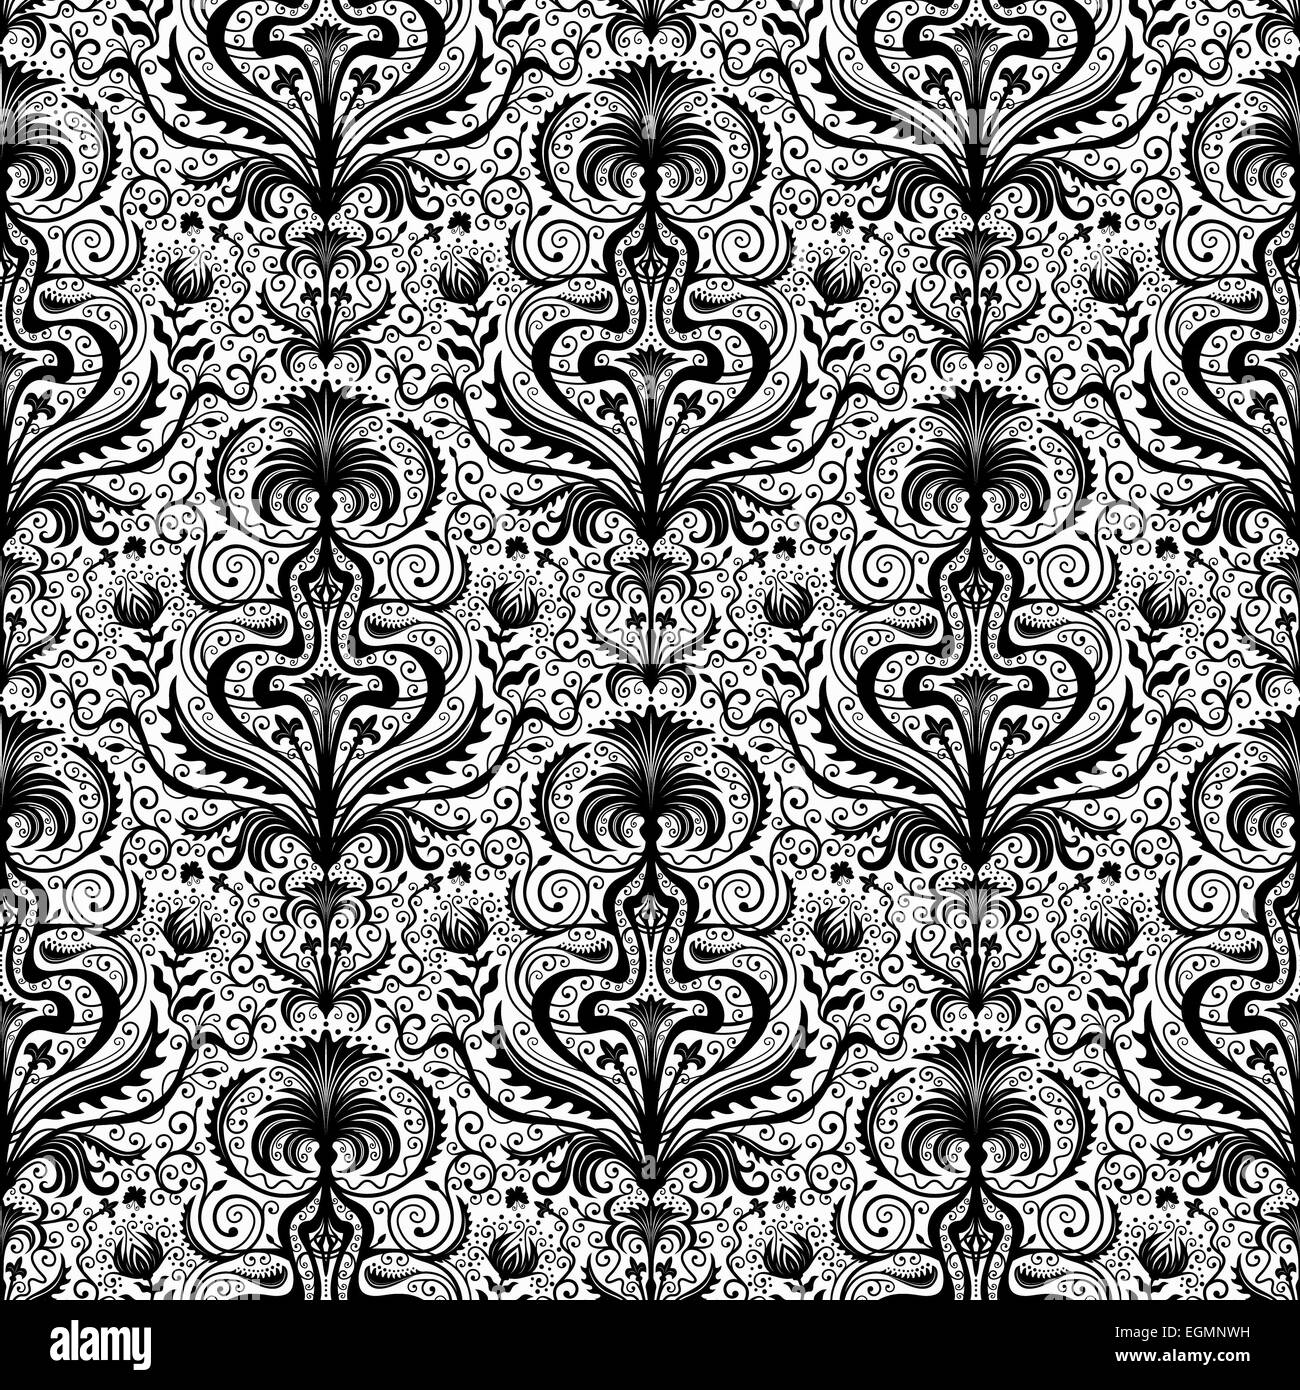 Elaborate Luxury Black Seamless Damask Floral Pattern with Flowers and Leaves on White Background Stock Photo